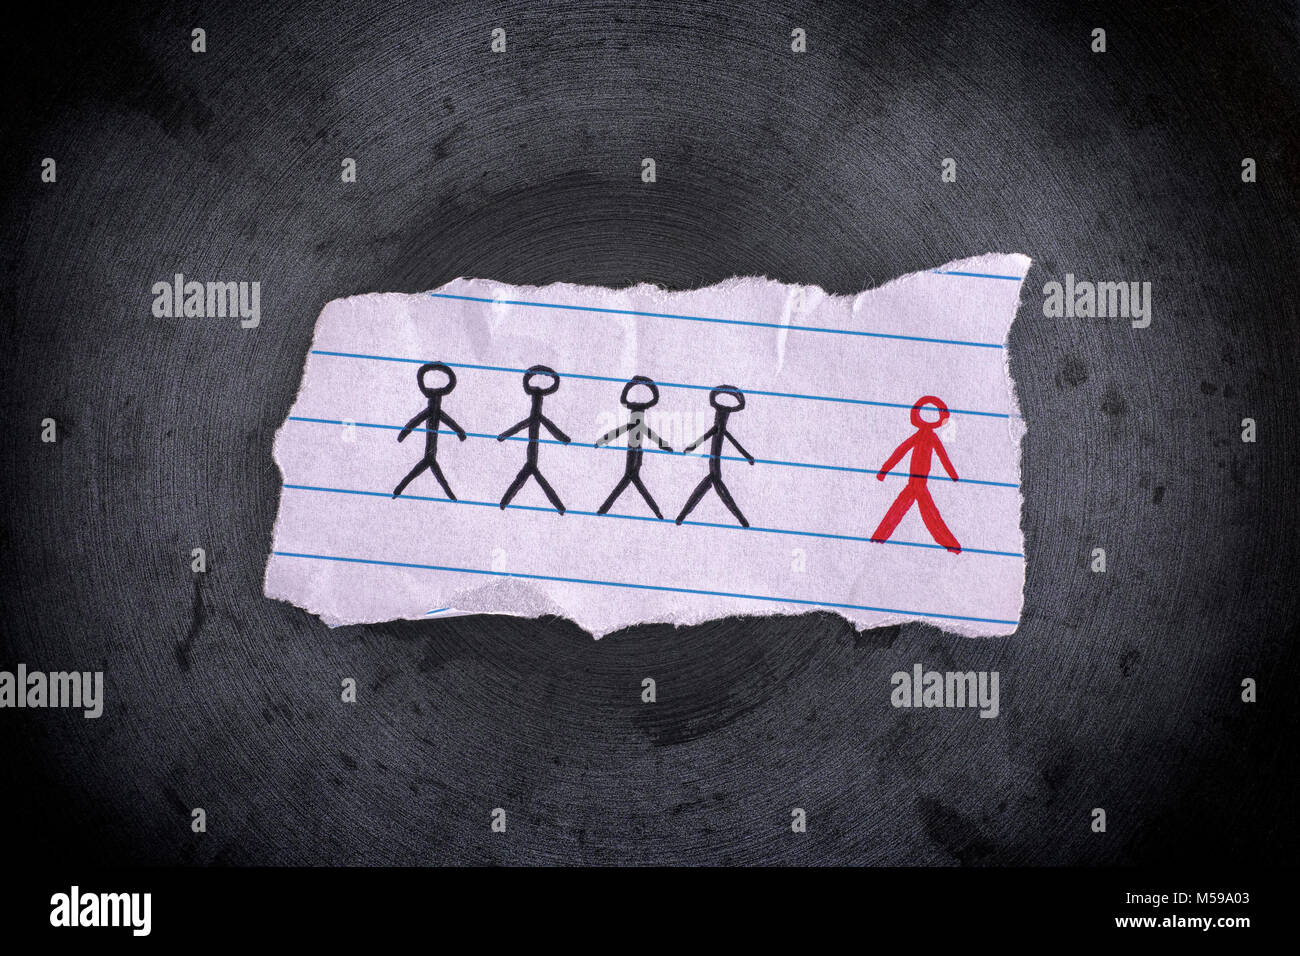 Piece of paper with drawn people and the red one is the odd one out. Concept Image. Close up. Stock Photo